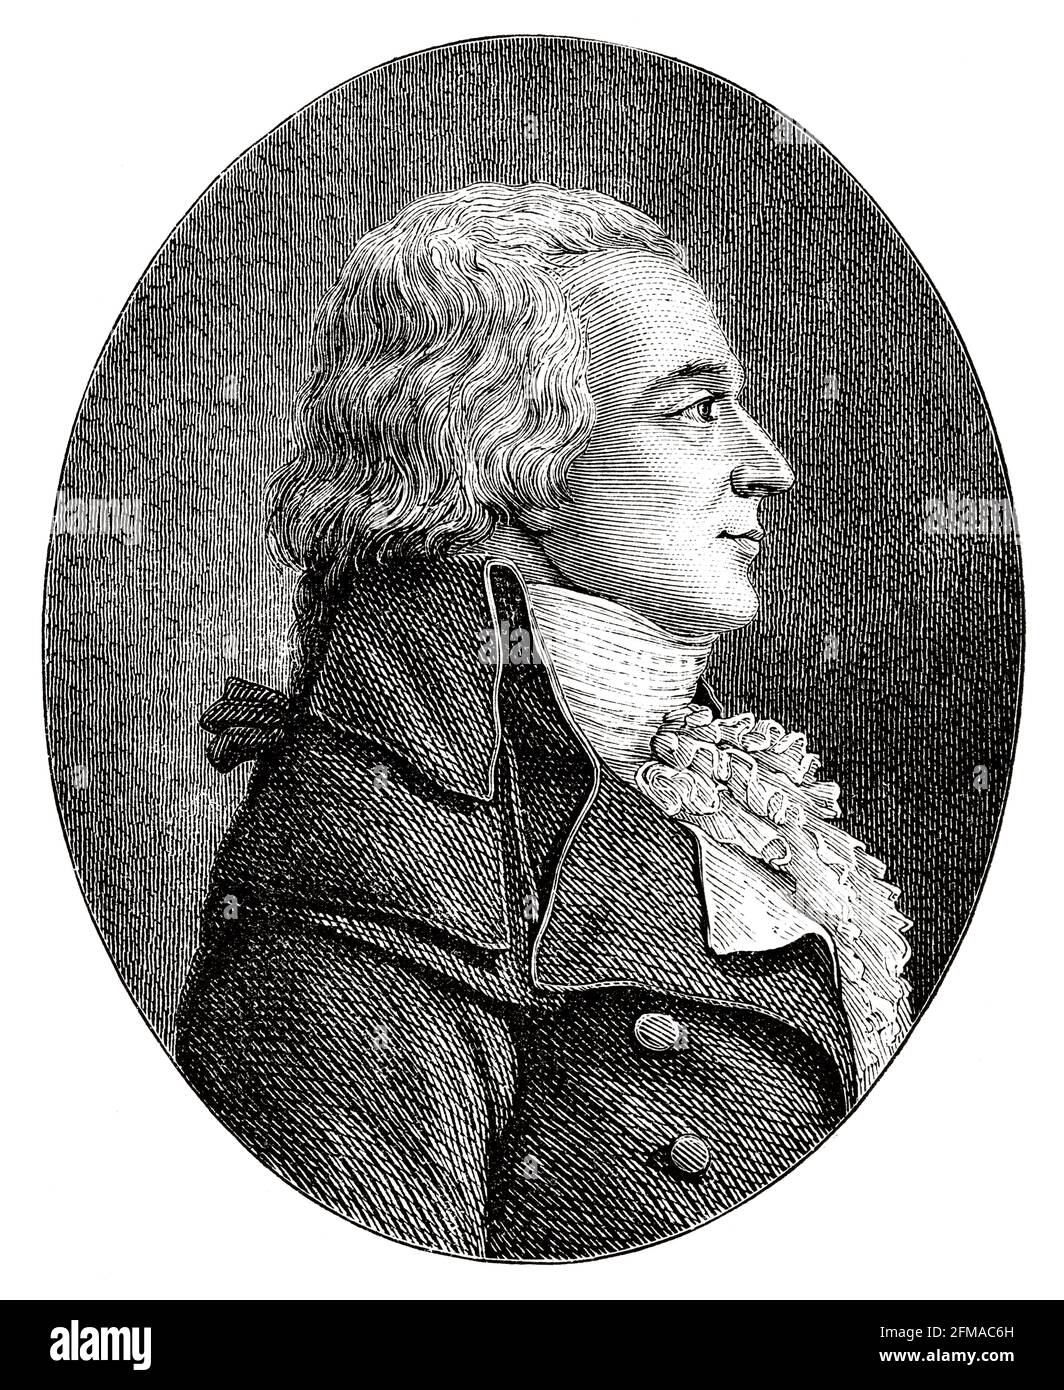 Portrait of Claude Basire (1764-1794) was a French politician of the Revolutionary period. France. Old 19th century engraved illustration from Histoire de la Revolution Francaise 1876 by Jules Michelet (1798-1874) Stock Photo